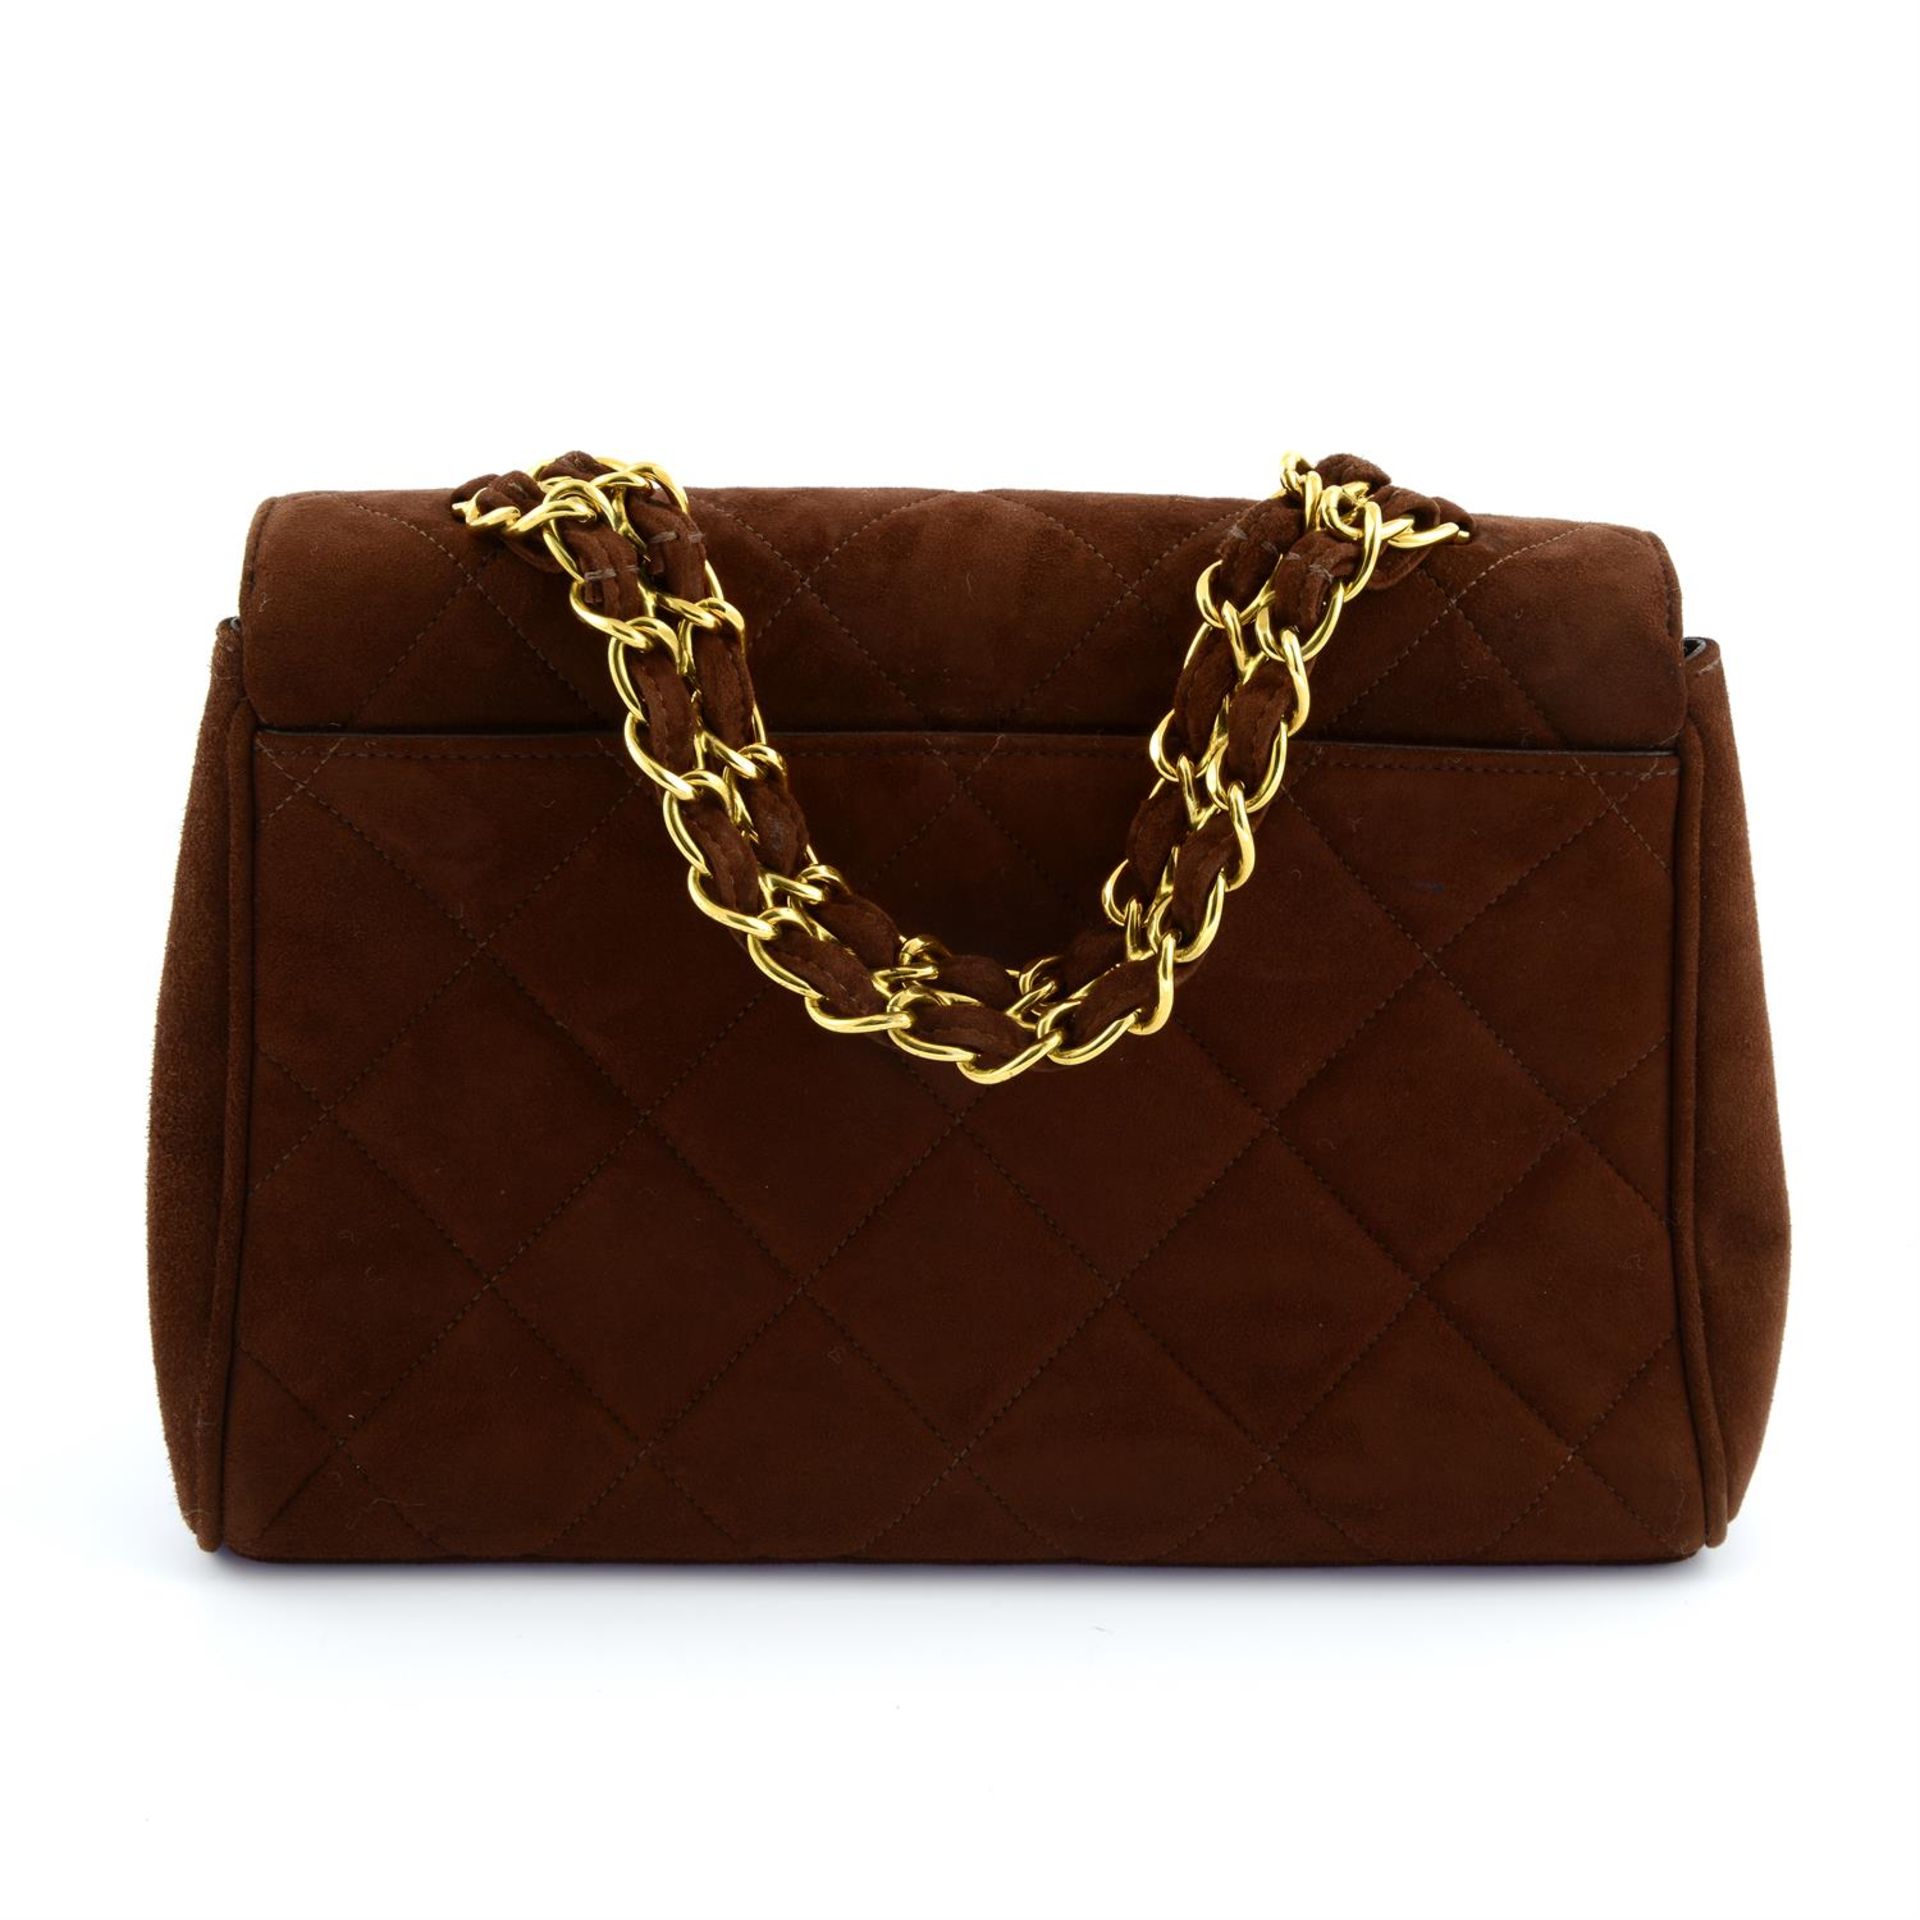 CHANEL - a brown suede leather top handle single flap handbag. - Image 2 of 4